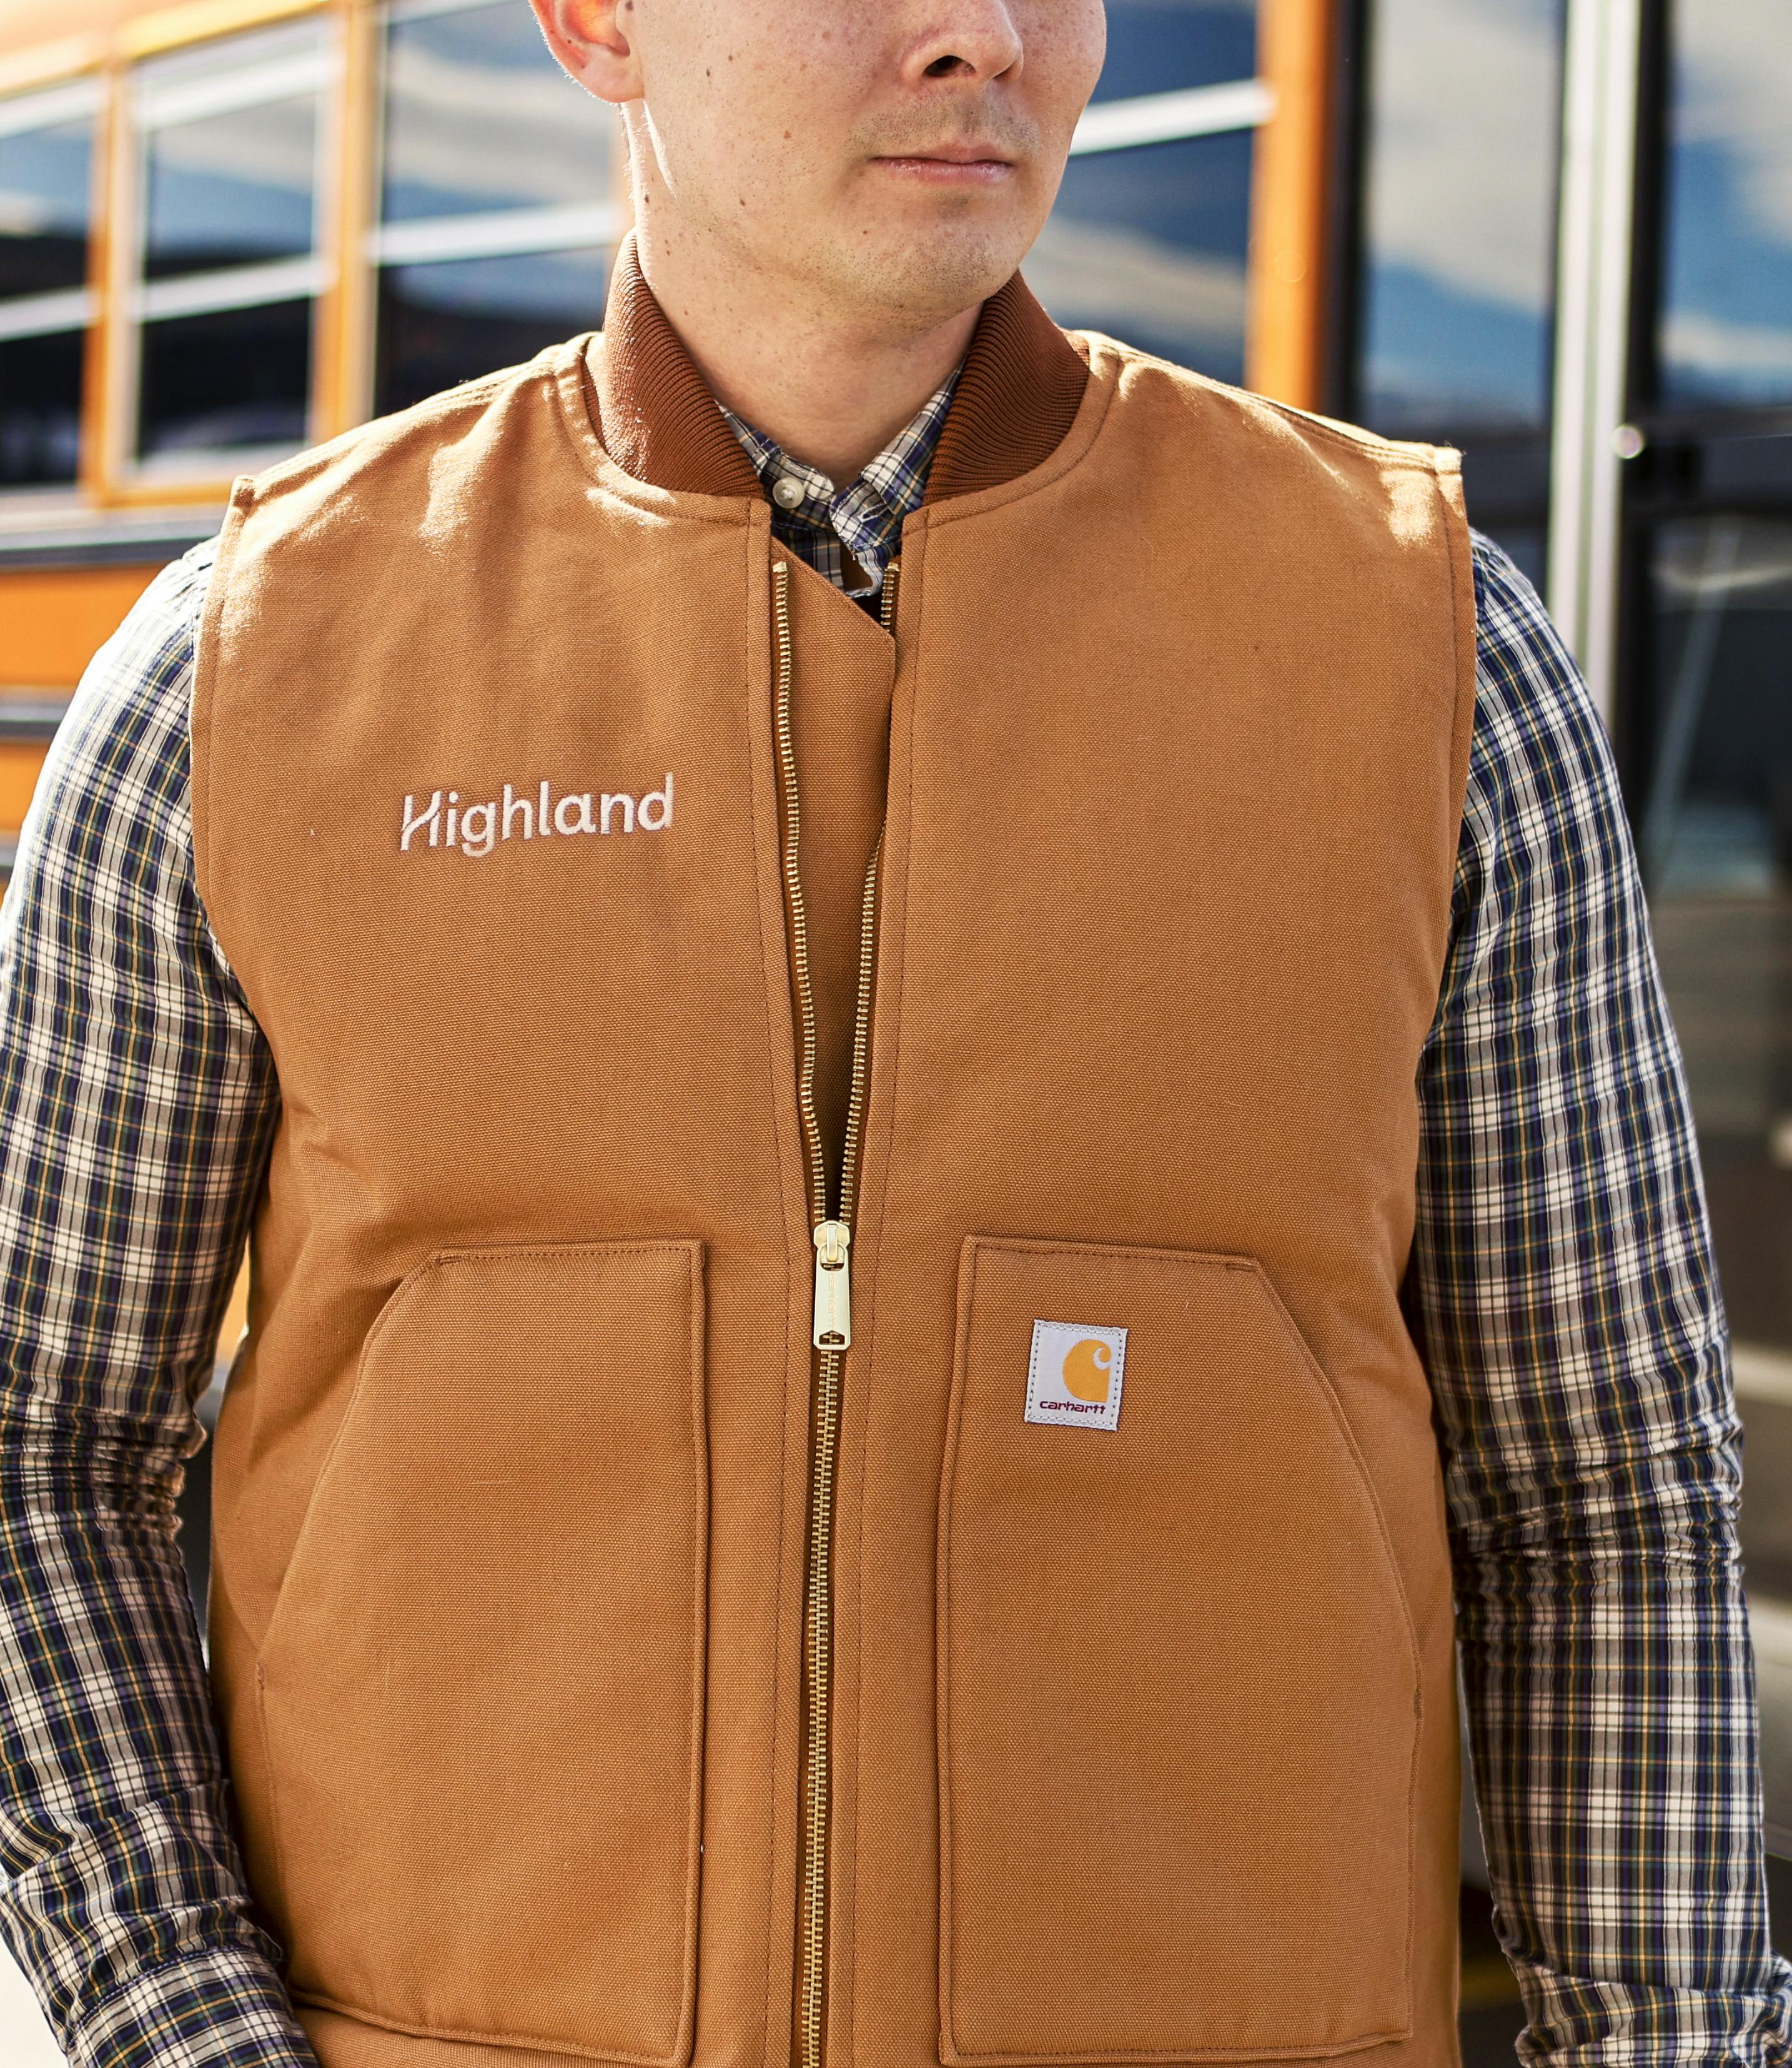 The Highland logo embroidered on a Carhartt vest.